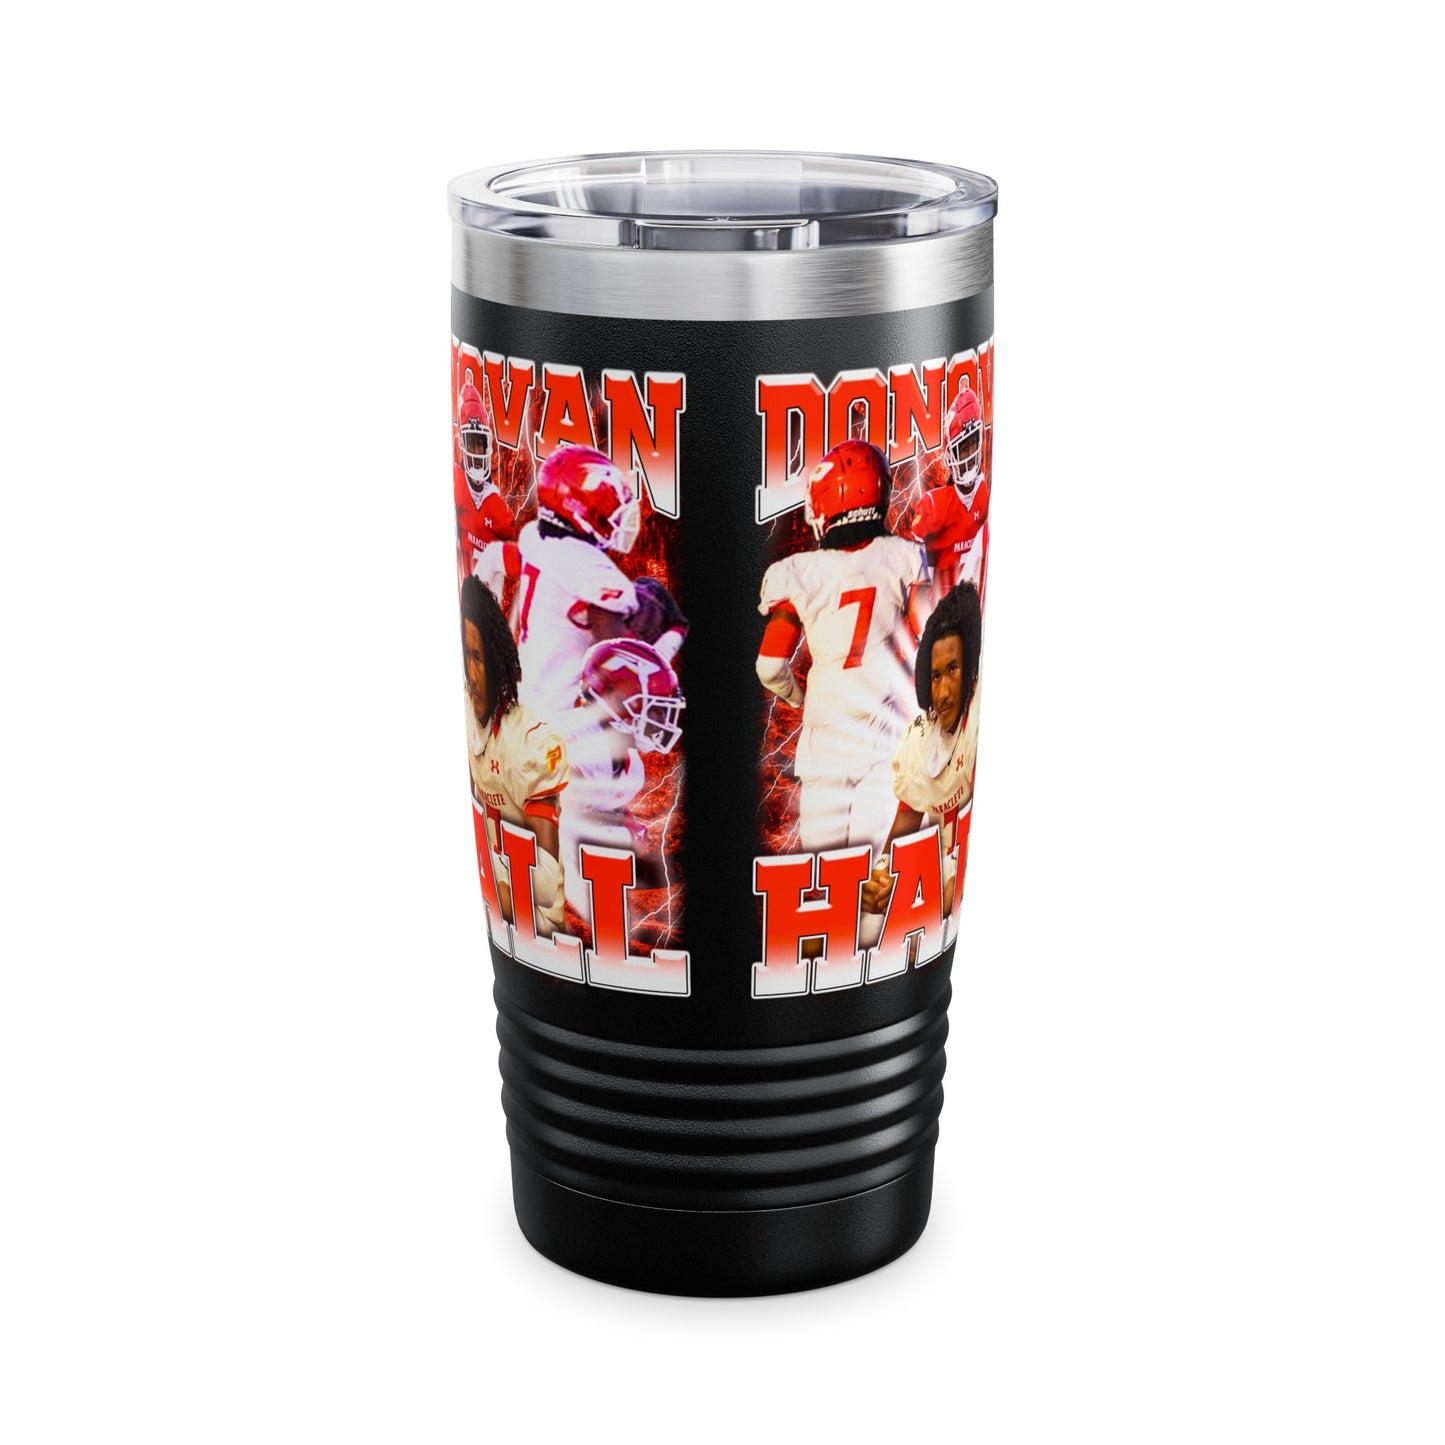 Donovan Hall Stainless Steal Tumbler